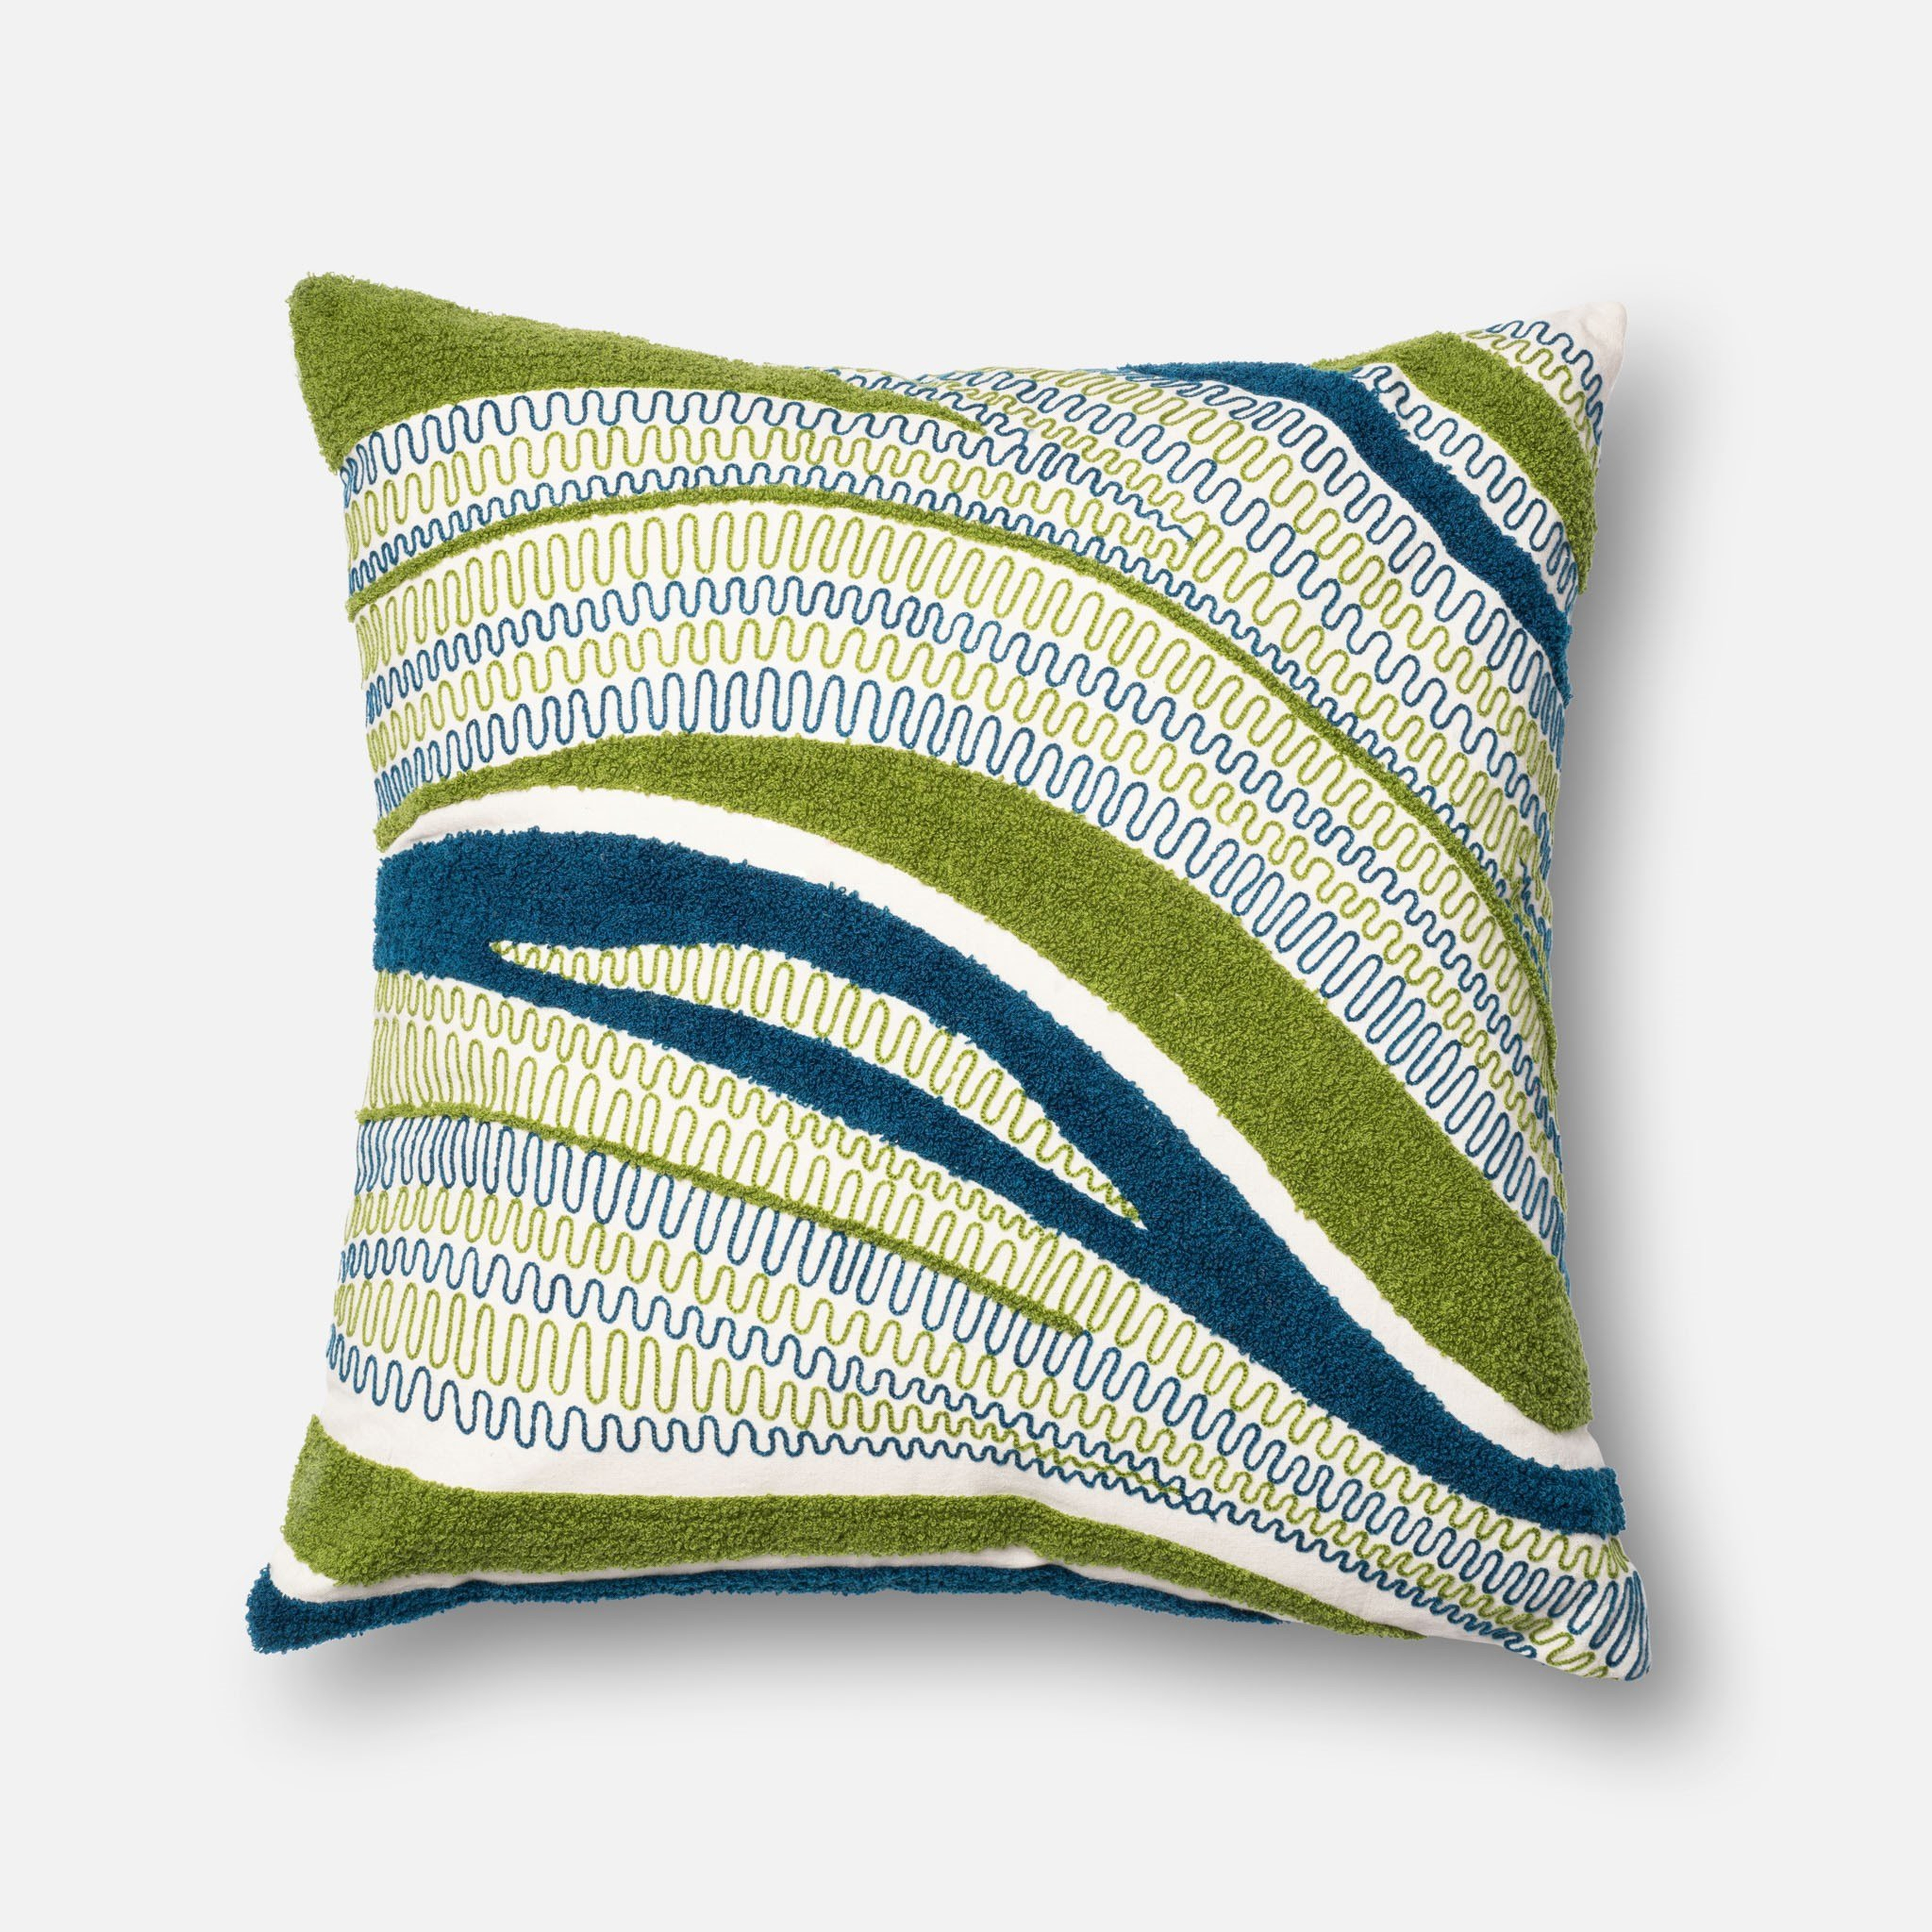 PILLOWS - BLUE / GREEN - 22" X 22" Cover Only - Loma Threads